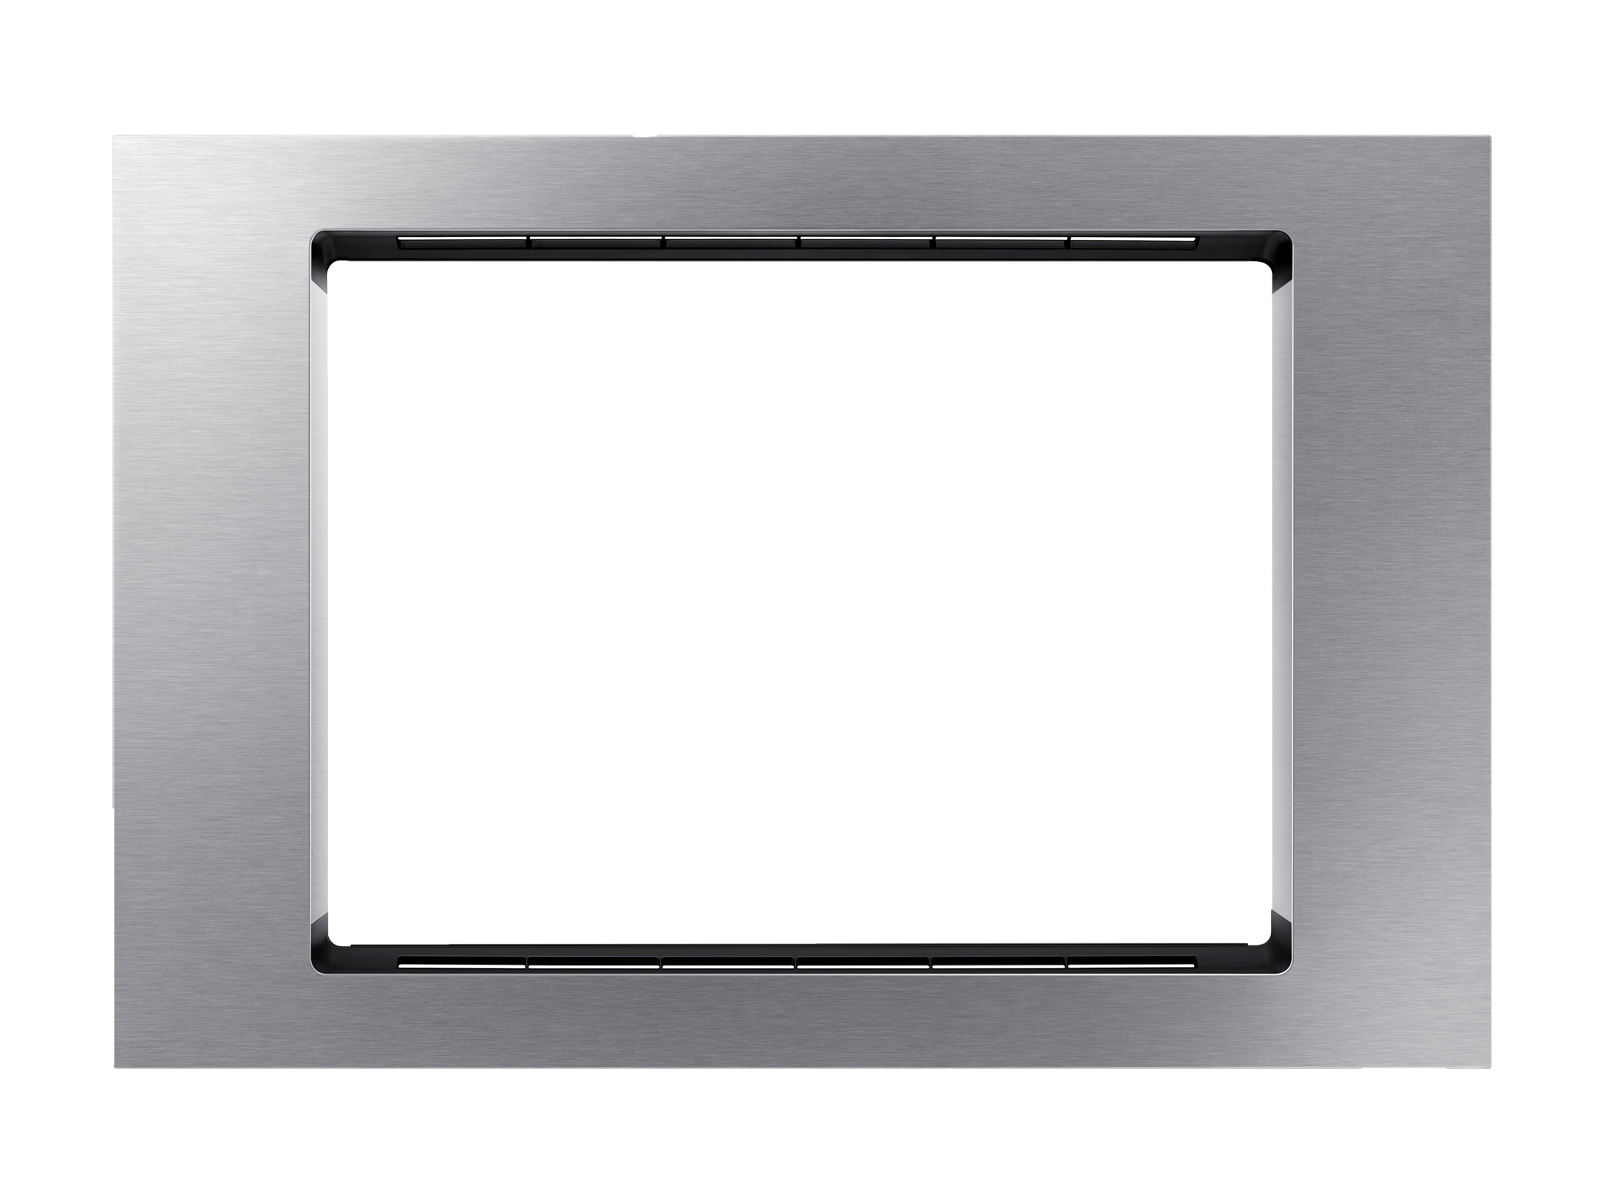 https://image-us.samsung.com/SamsungUS/home/home-appliances/home-appliances-accessories/microwaves/pd/ma-tk3080ct/01_MA-TK3080CT_Front_Just_Trim_Kit_Piece_Silver.jpg?$product-details-jpg$